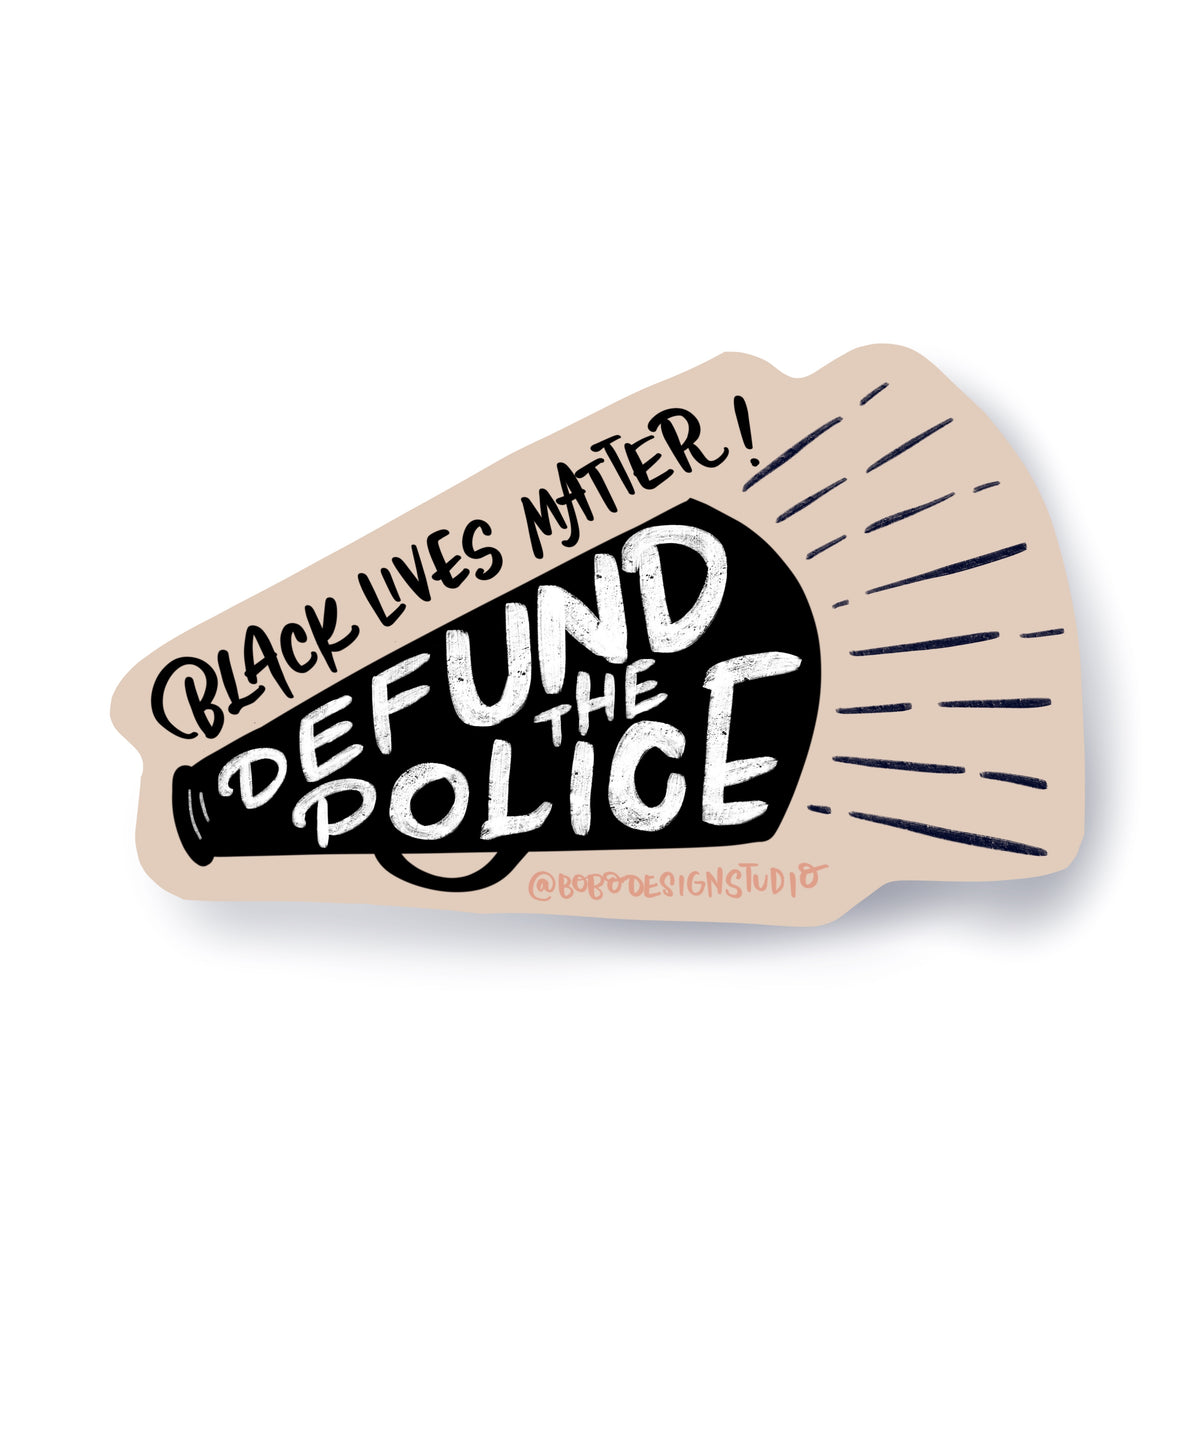 Defund the Police sticker that supports the BLM movement